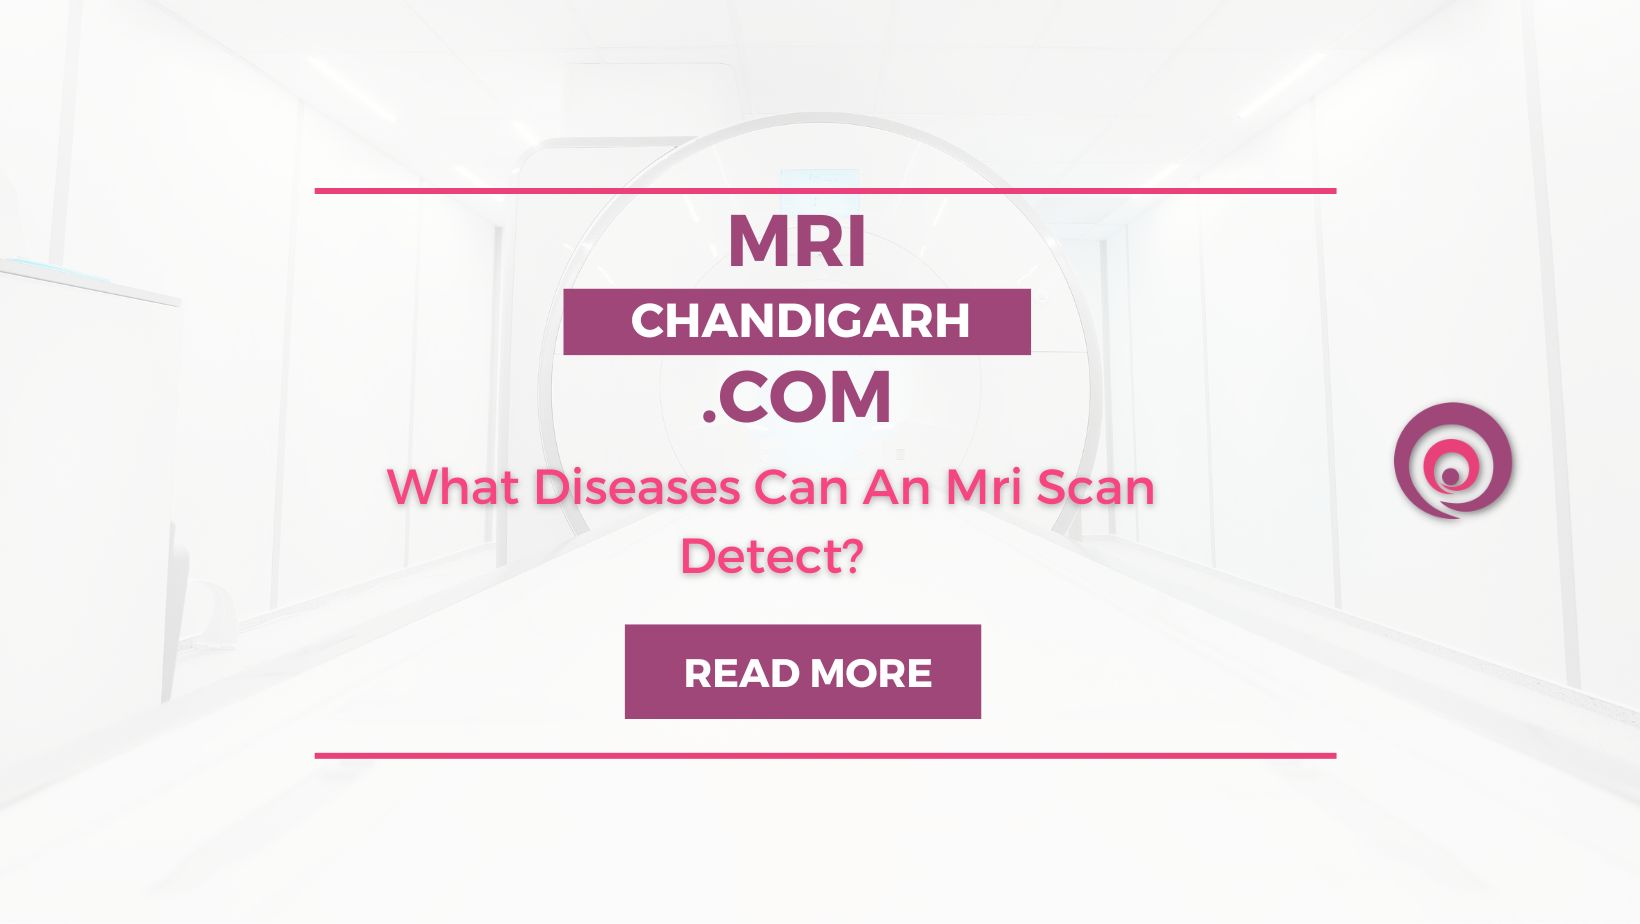 What Diseases Can An Mri Scan Detect?